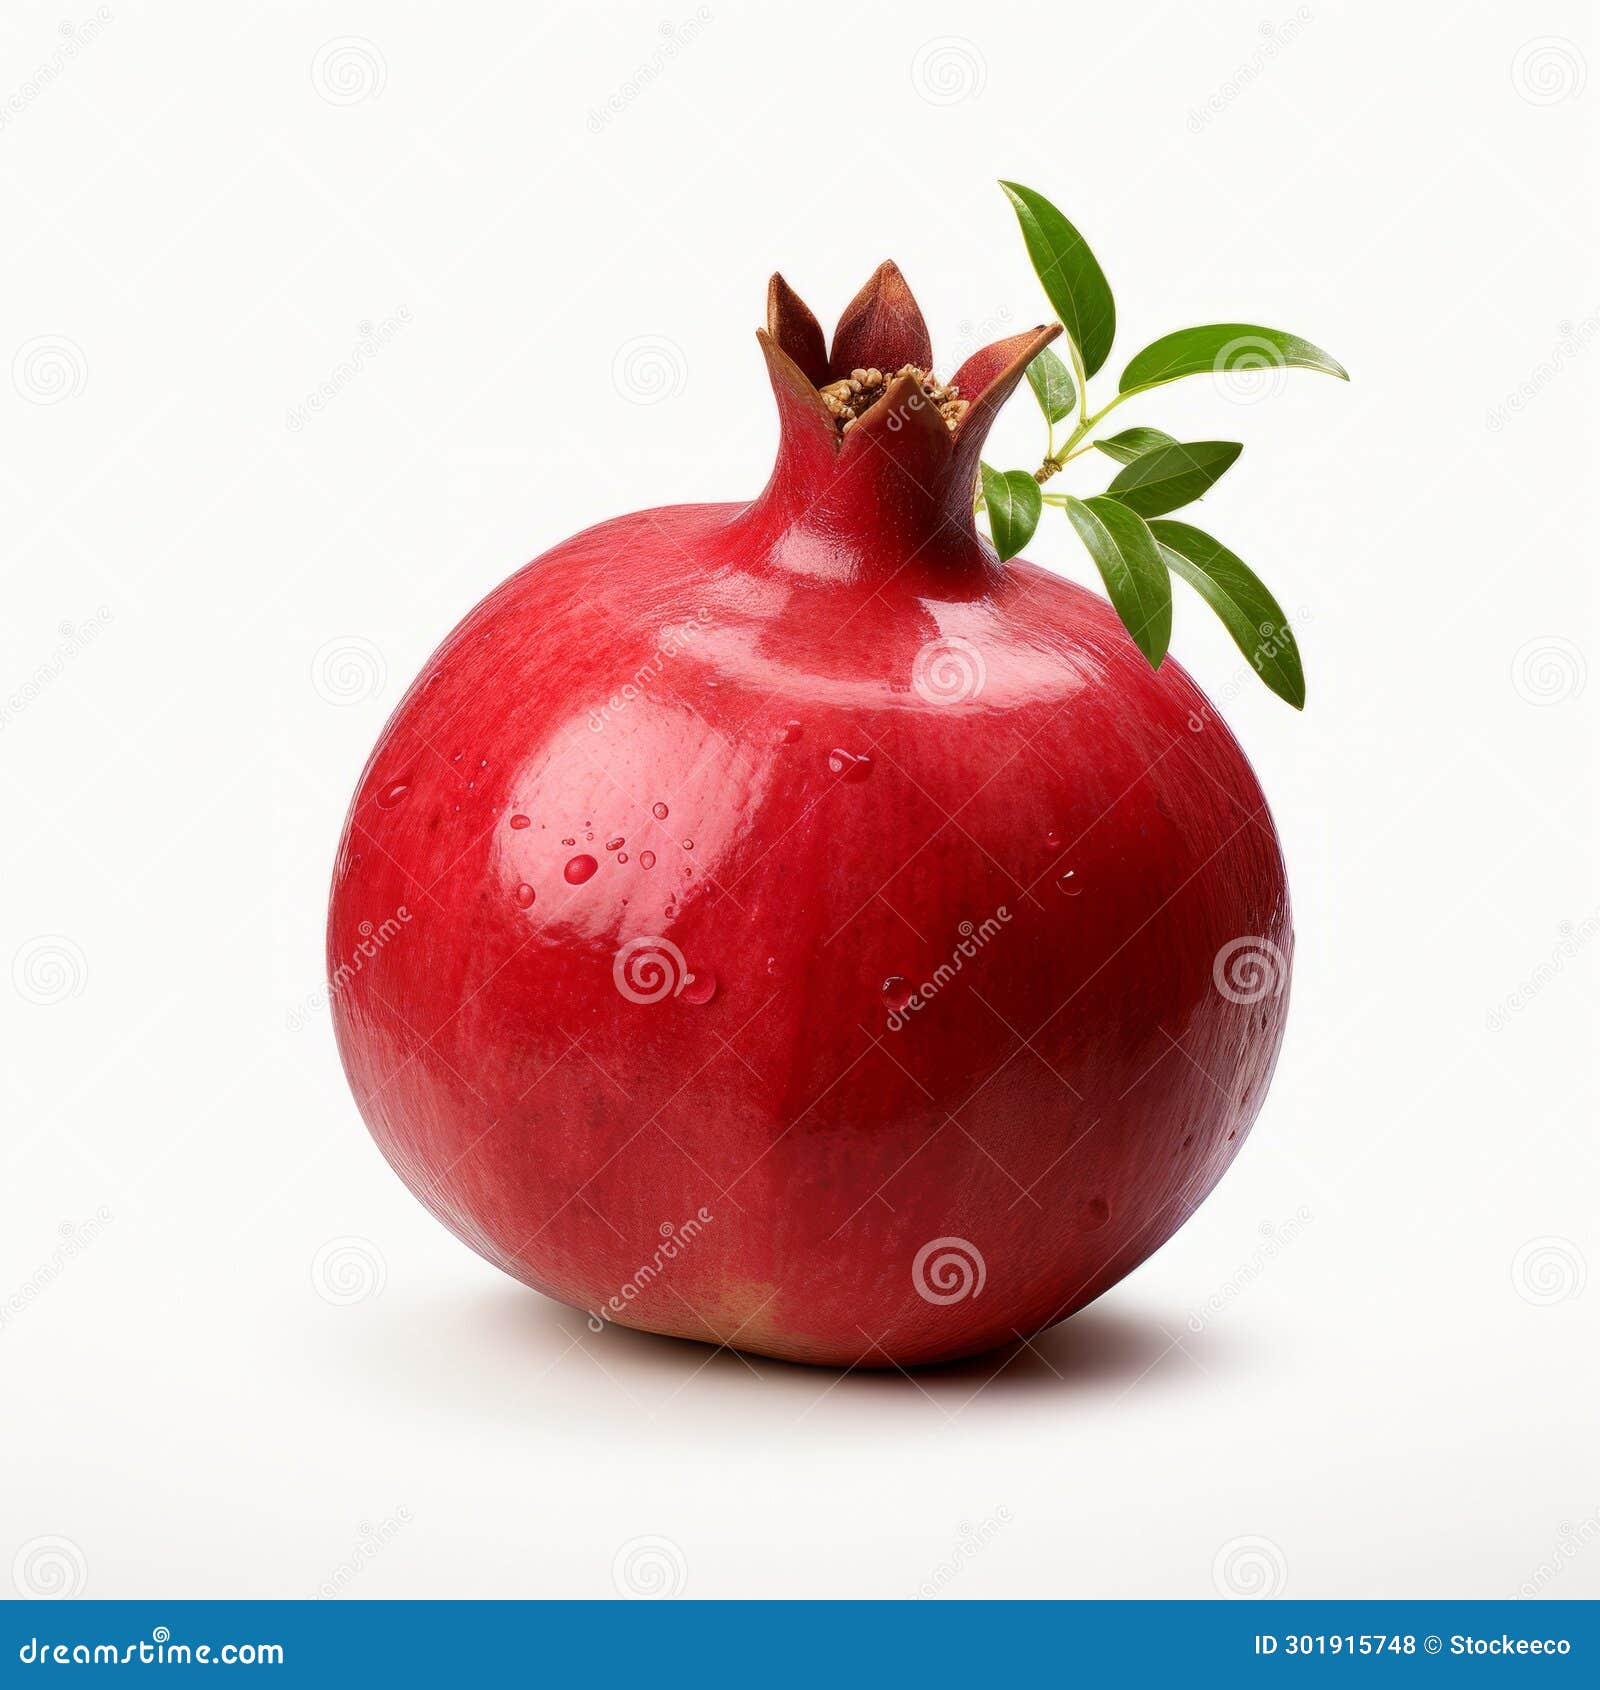 uhd image of a flickr-style pomegranate on white background